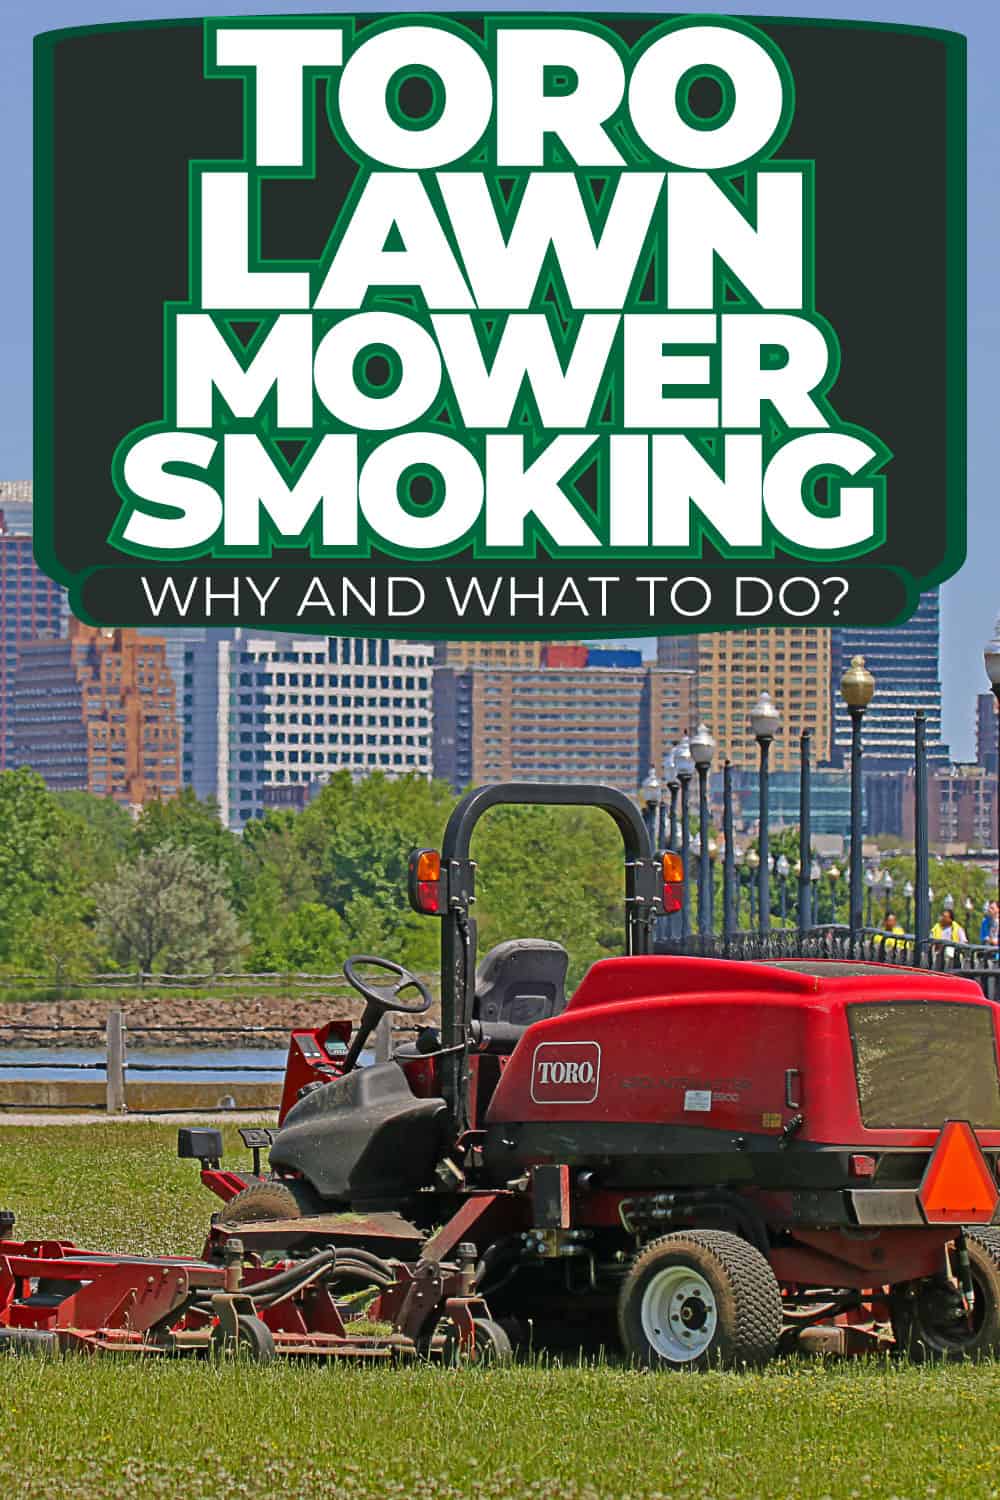 Toro Lawn Mower Smoking – Why And What To Do